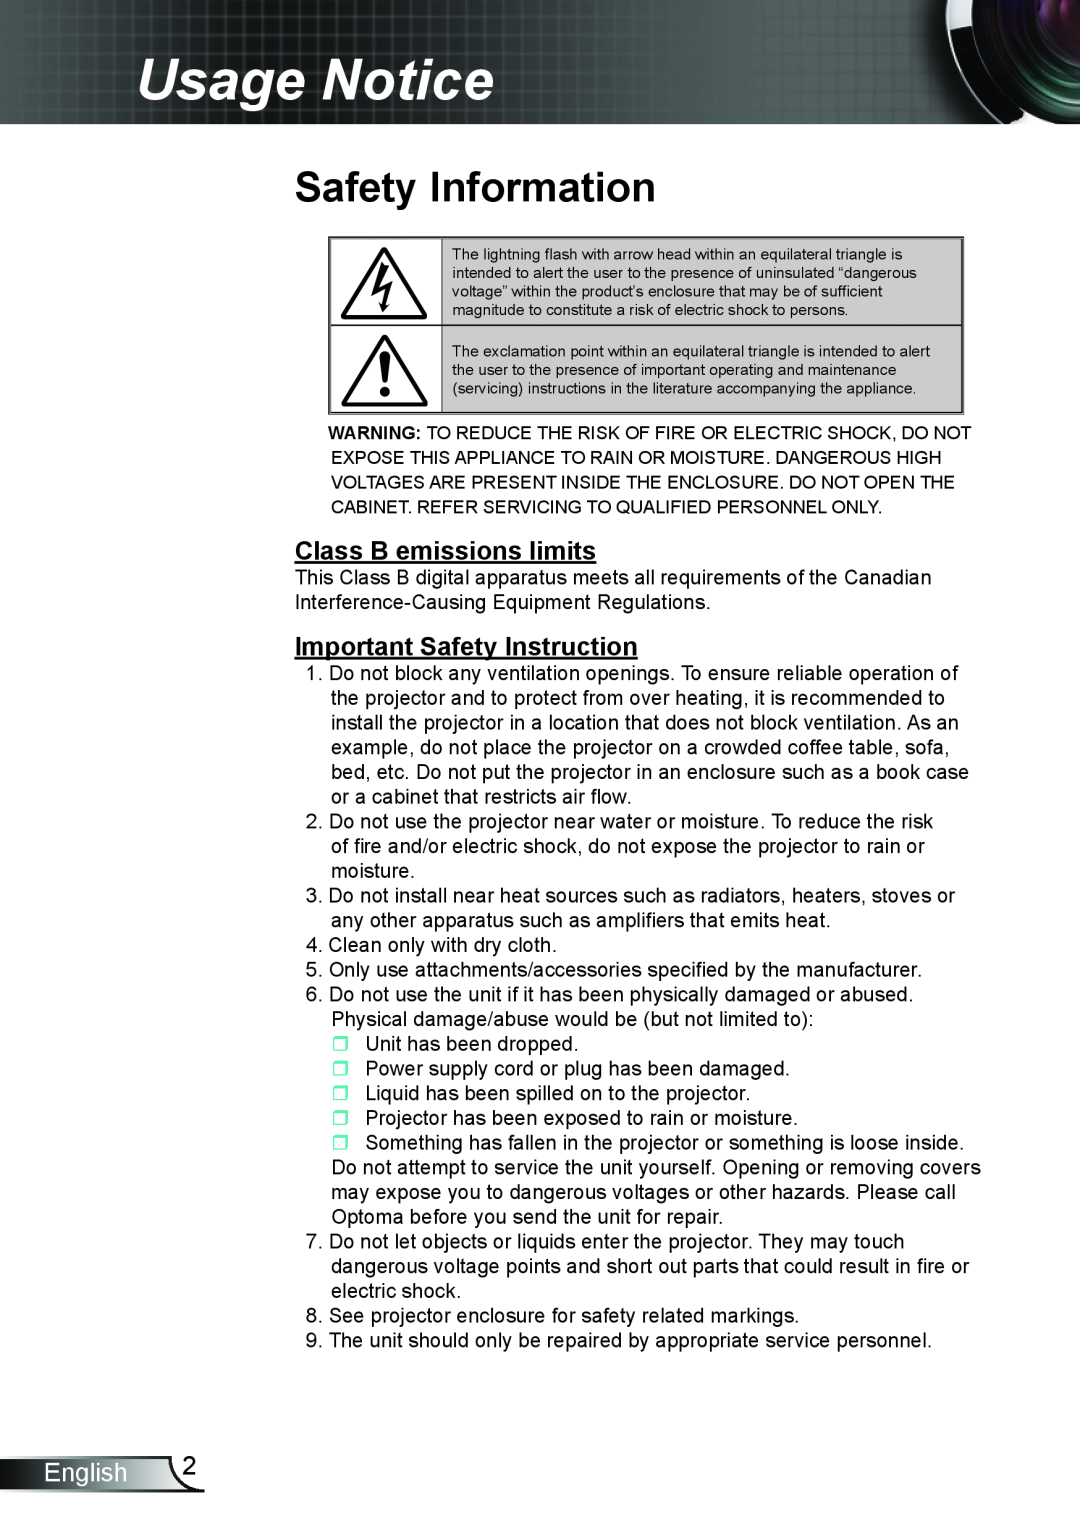 Optoma Technology TW6353D manual Usage Notice, Safety Information, Class B emissions limits, Important Safety Instruction 